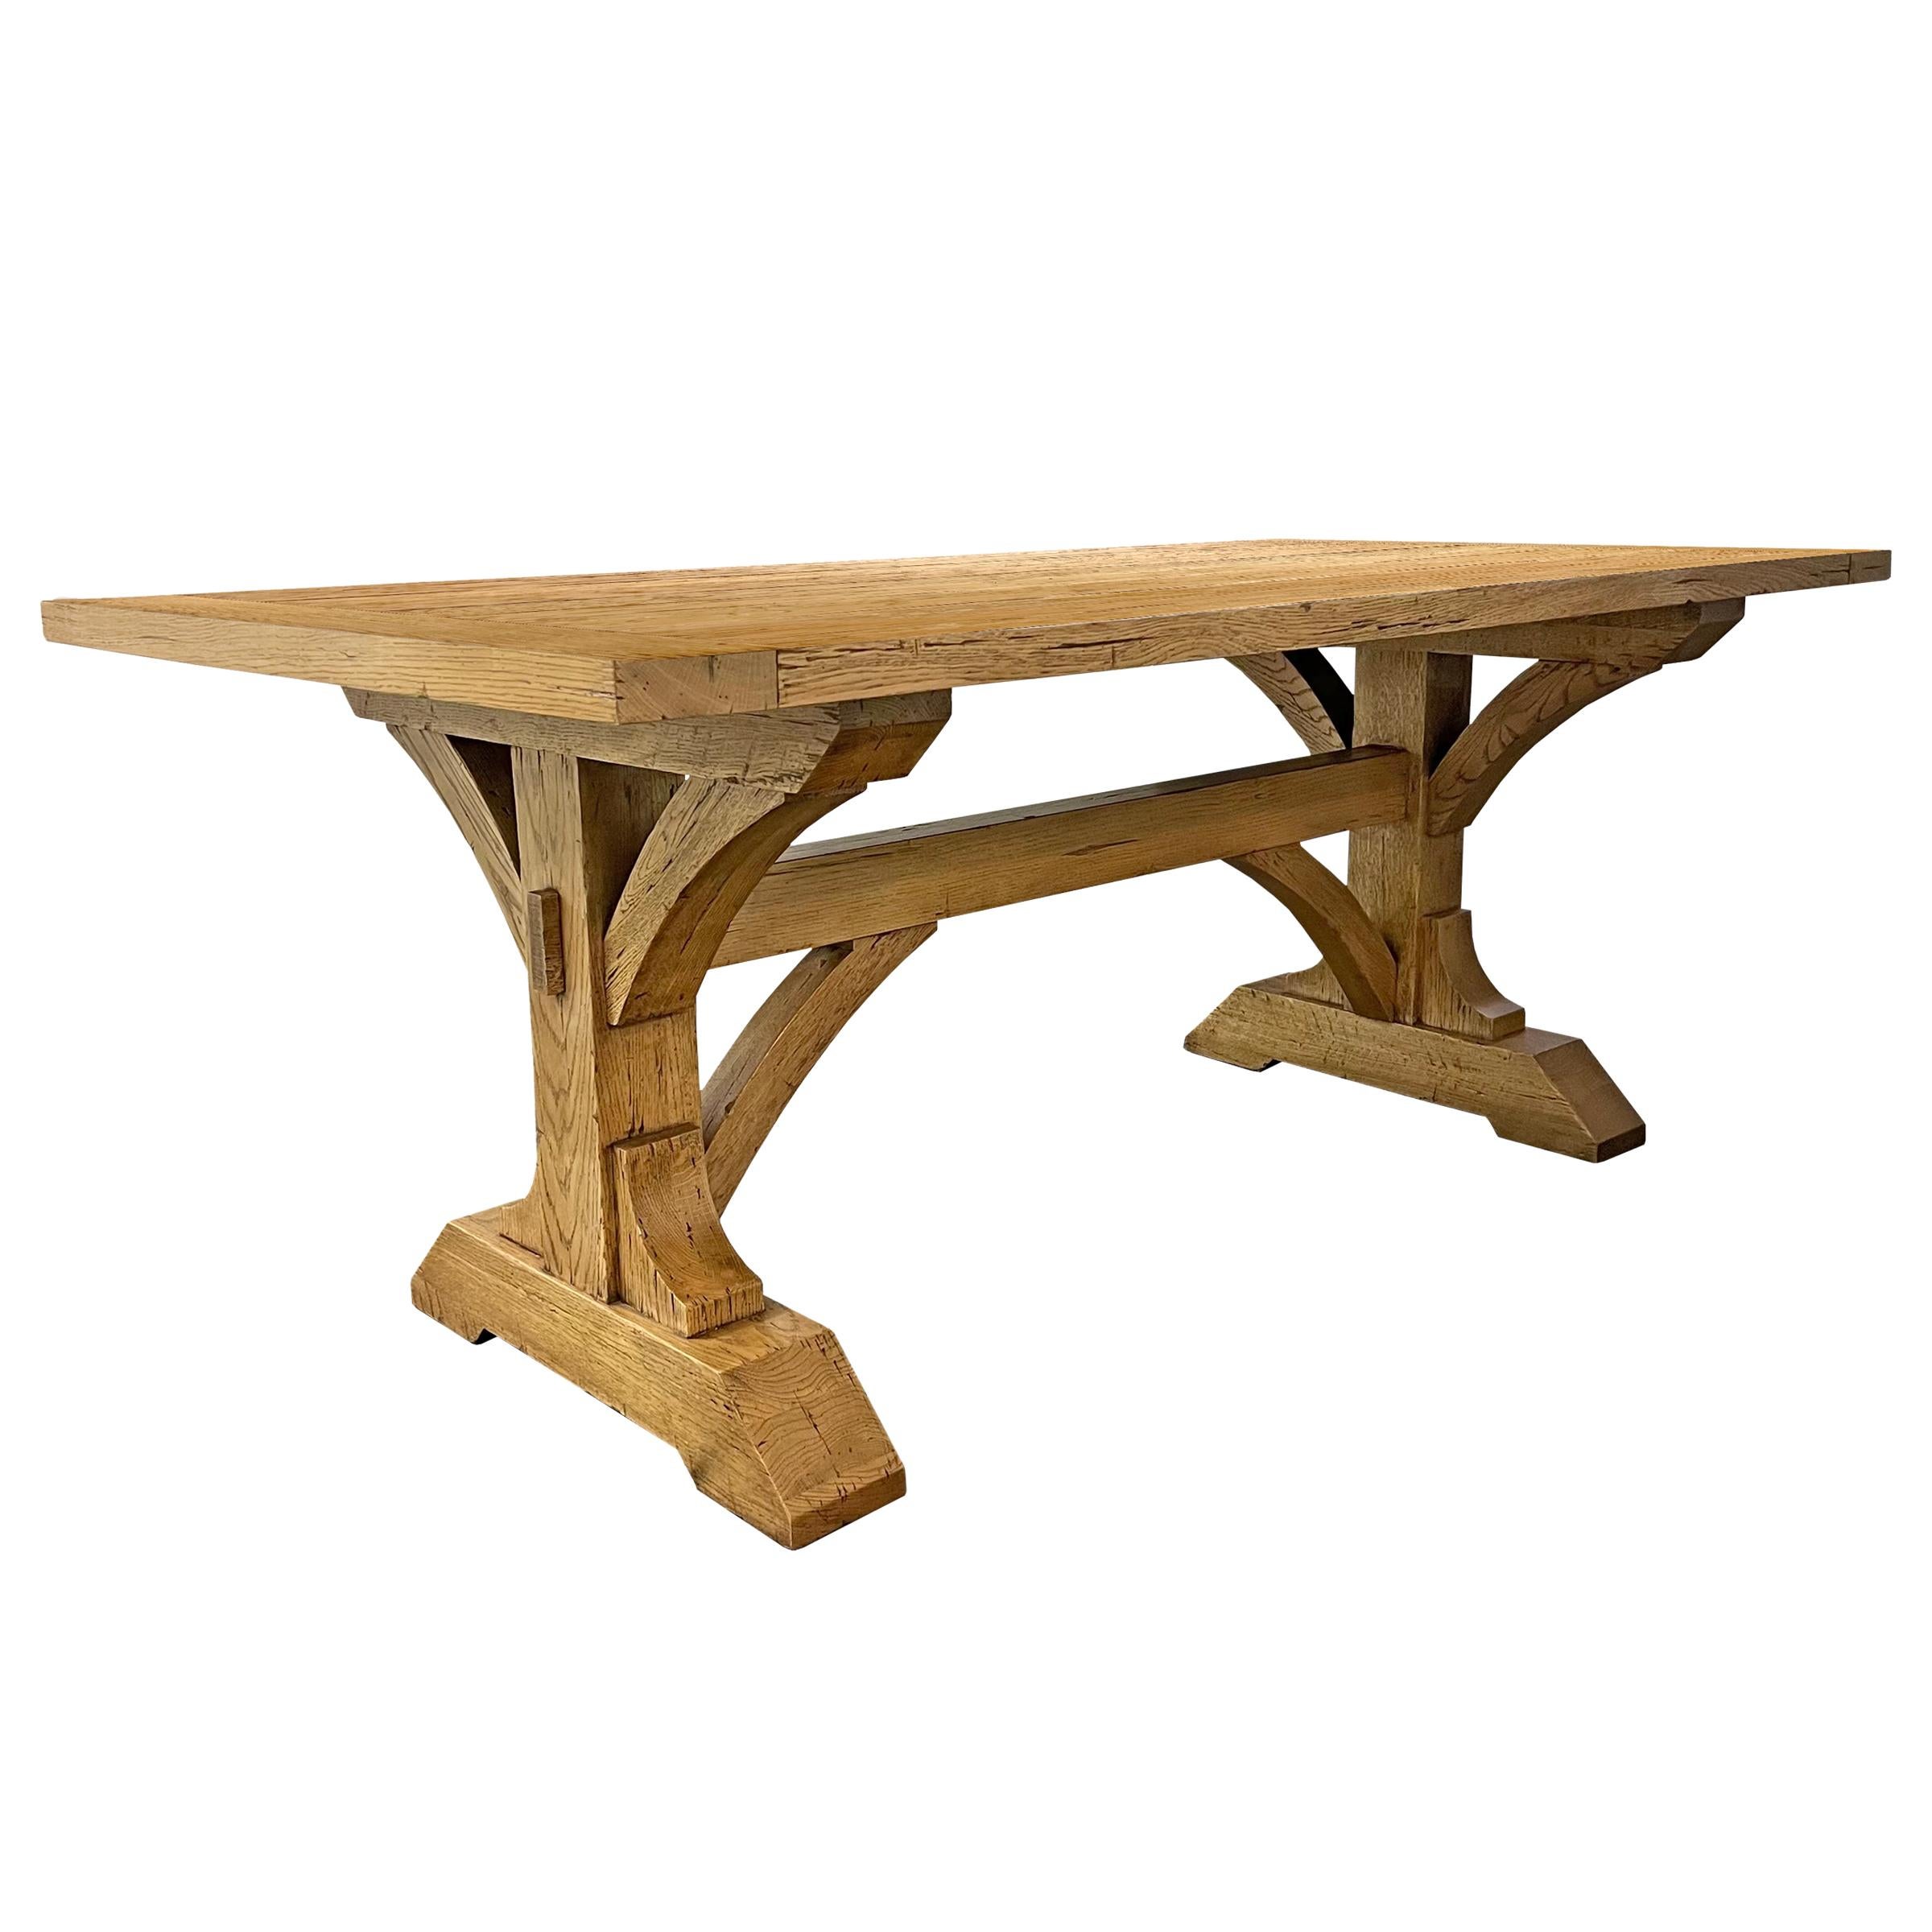 Rustic Solid Oak Timber Frame Trestle Table For Sale